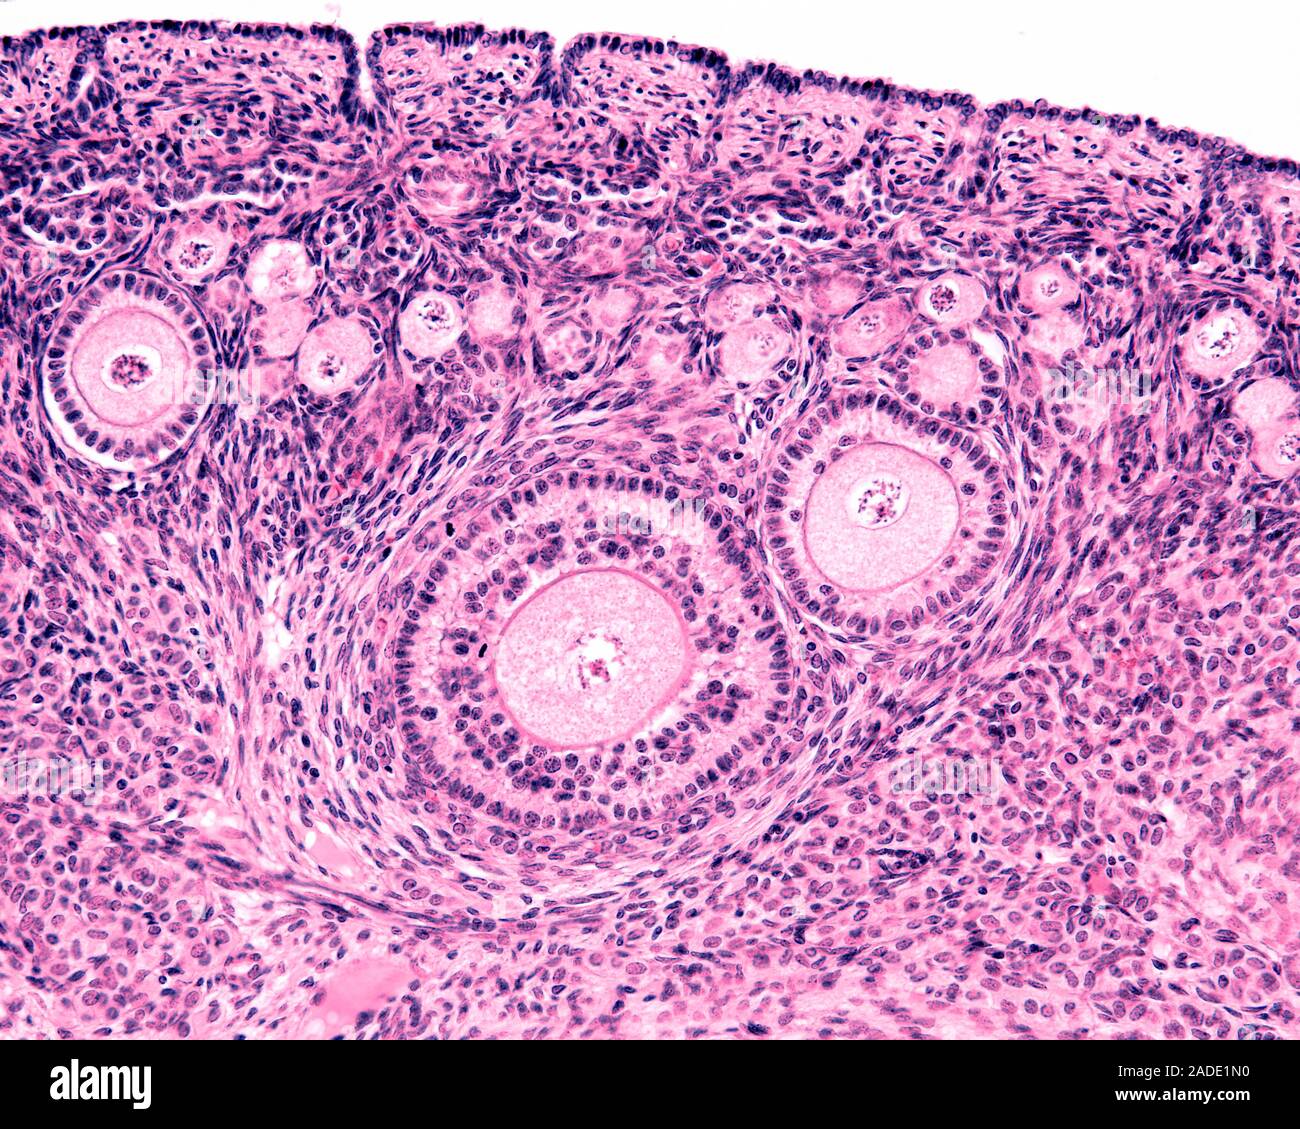 Light micrograph of the ovarian cortex showing, from top to bottom, the ...